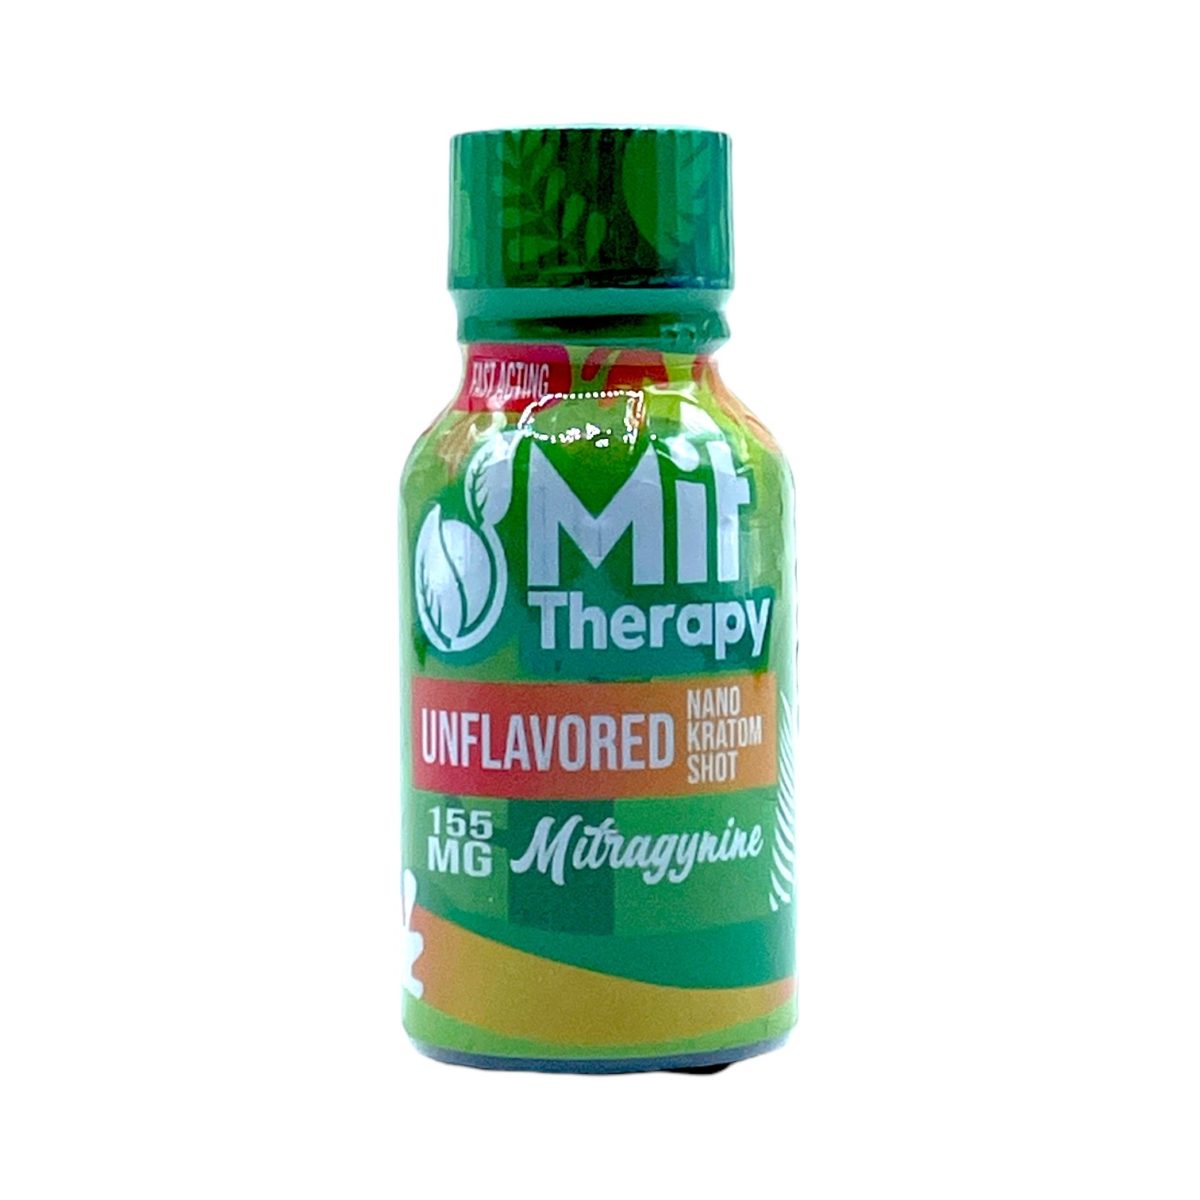 MIT Therapy Unflavored Kratom Shot DEAL